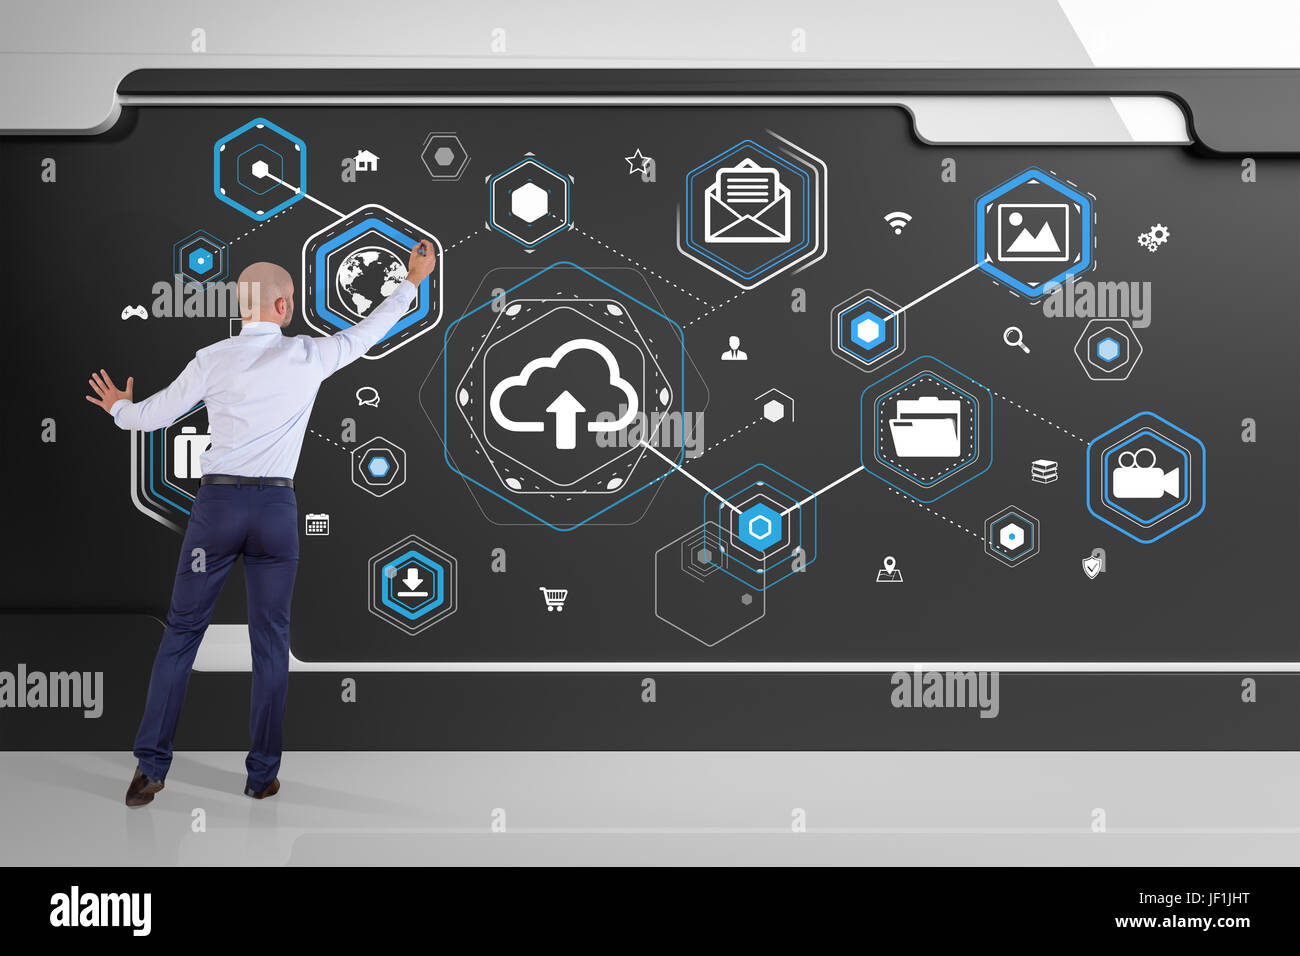 Businessman in modern interior using social network interface on a board 3D rendering Stock Photo